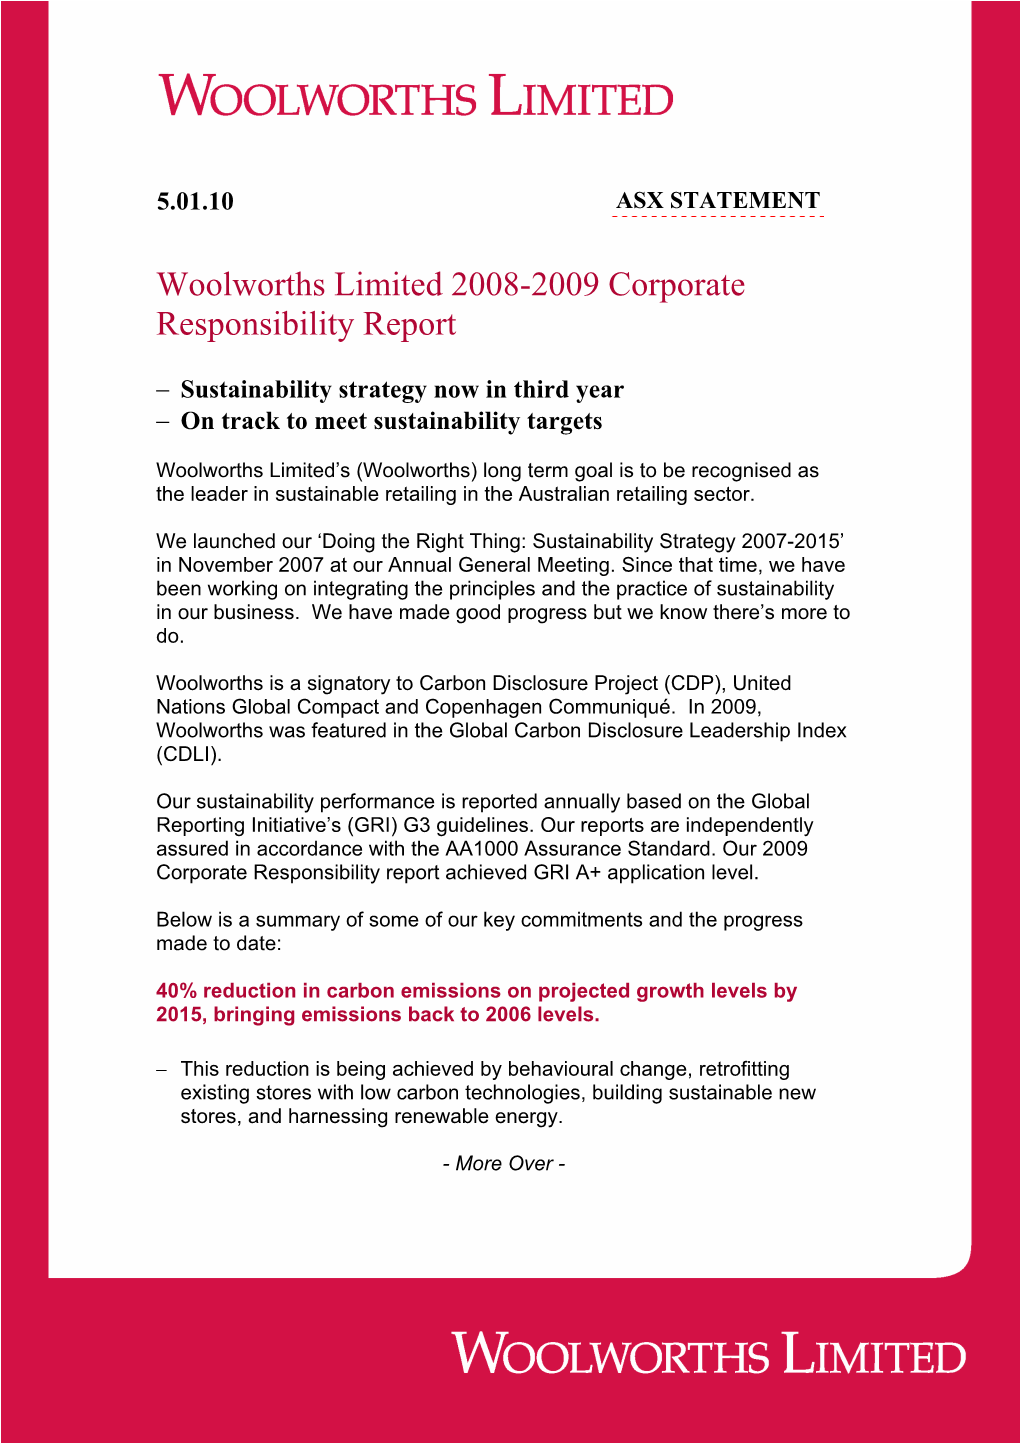 Woolworths Limited 2008-2009 Corporate Responsibility Report